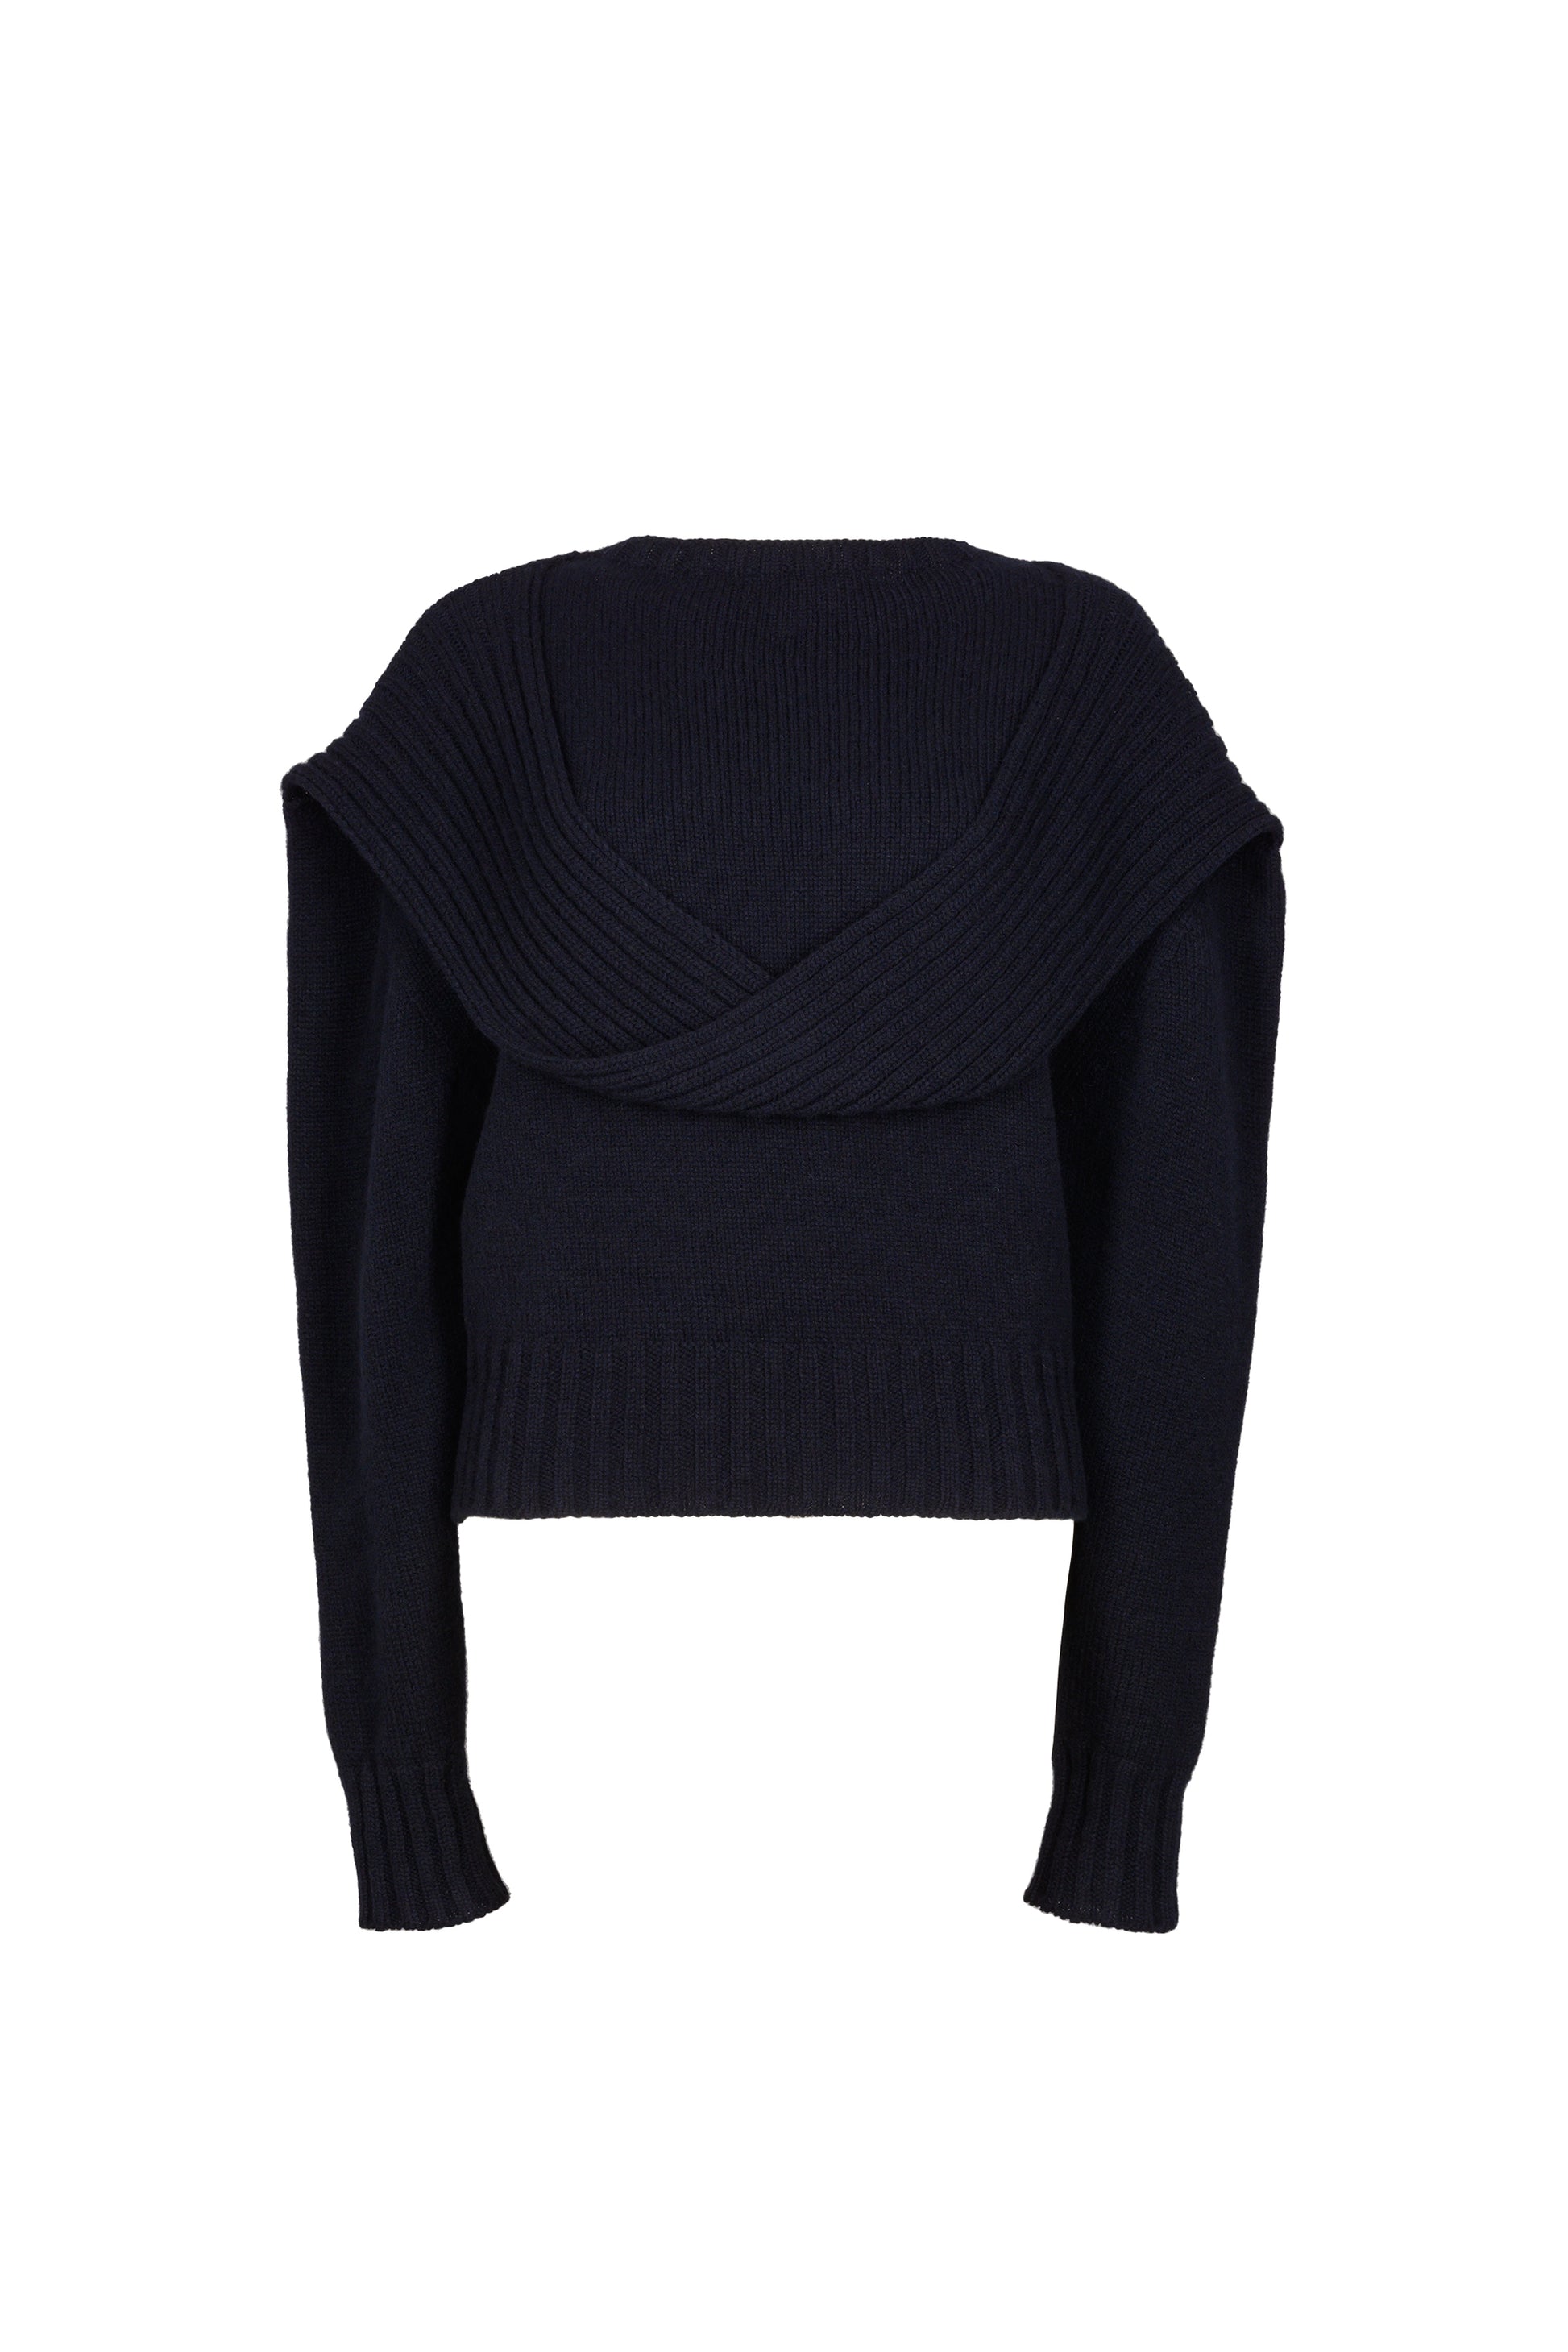 Chunky knit jumper featuring a distinctive loop detail at the draped neckline, with fitted sleeves for a contemporary and stylish look.